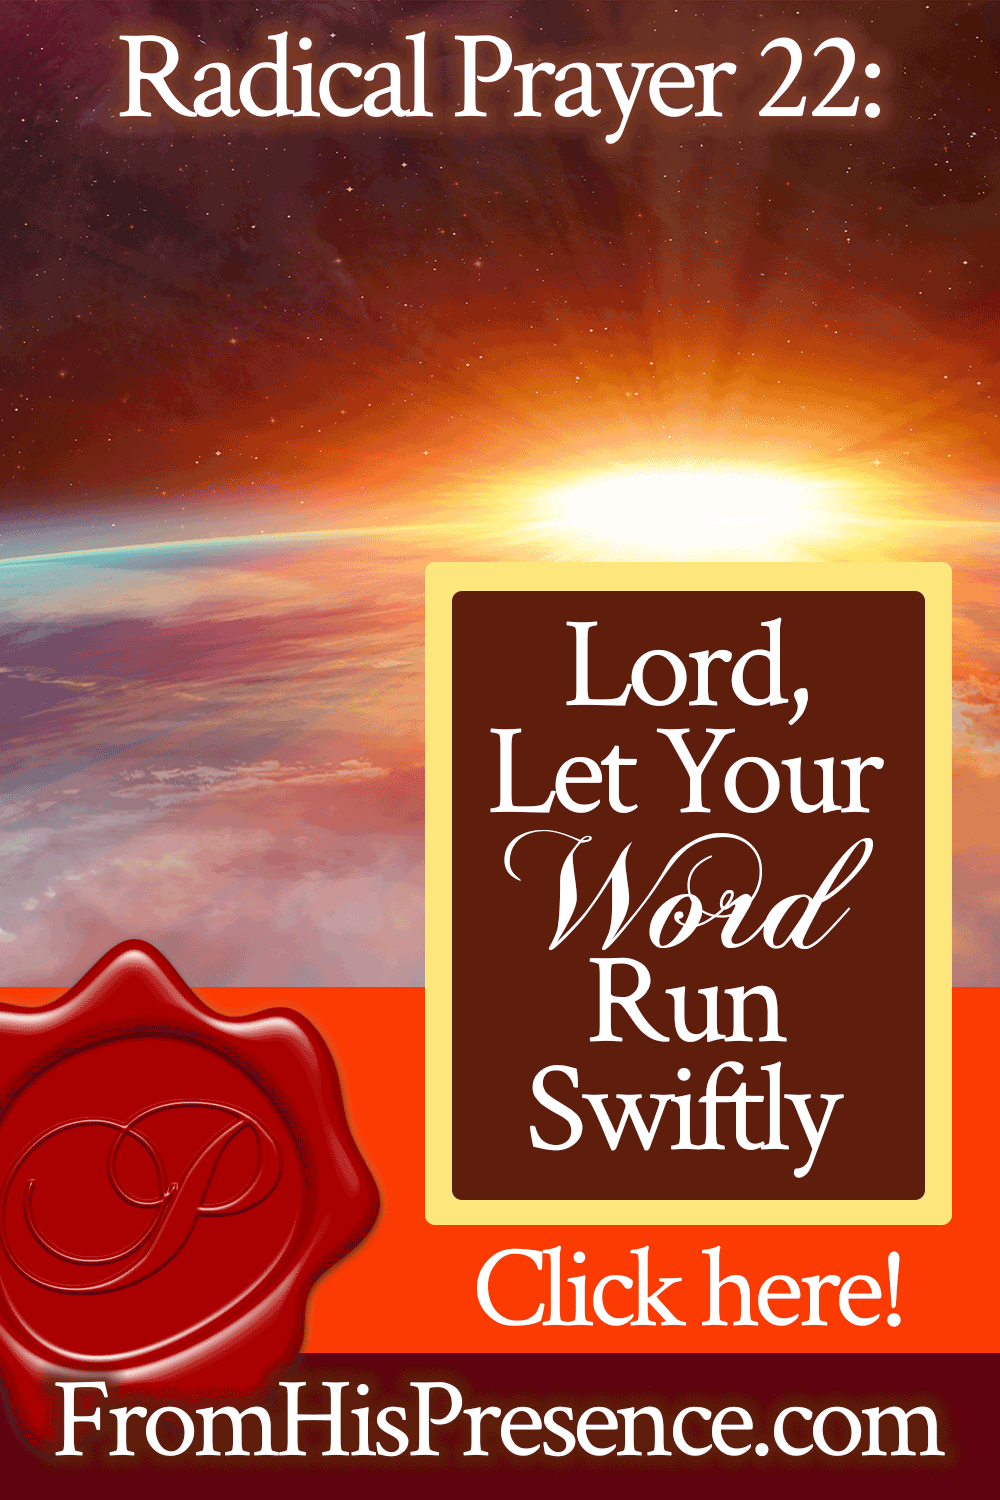 Radical Prayer 22: Lord, Let Your Word Run Swiftly | FromHisPresence.com | by Jamie Rohrbaugh